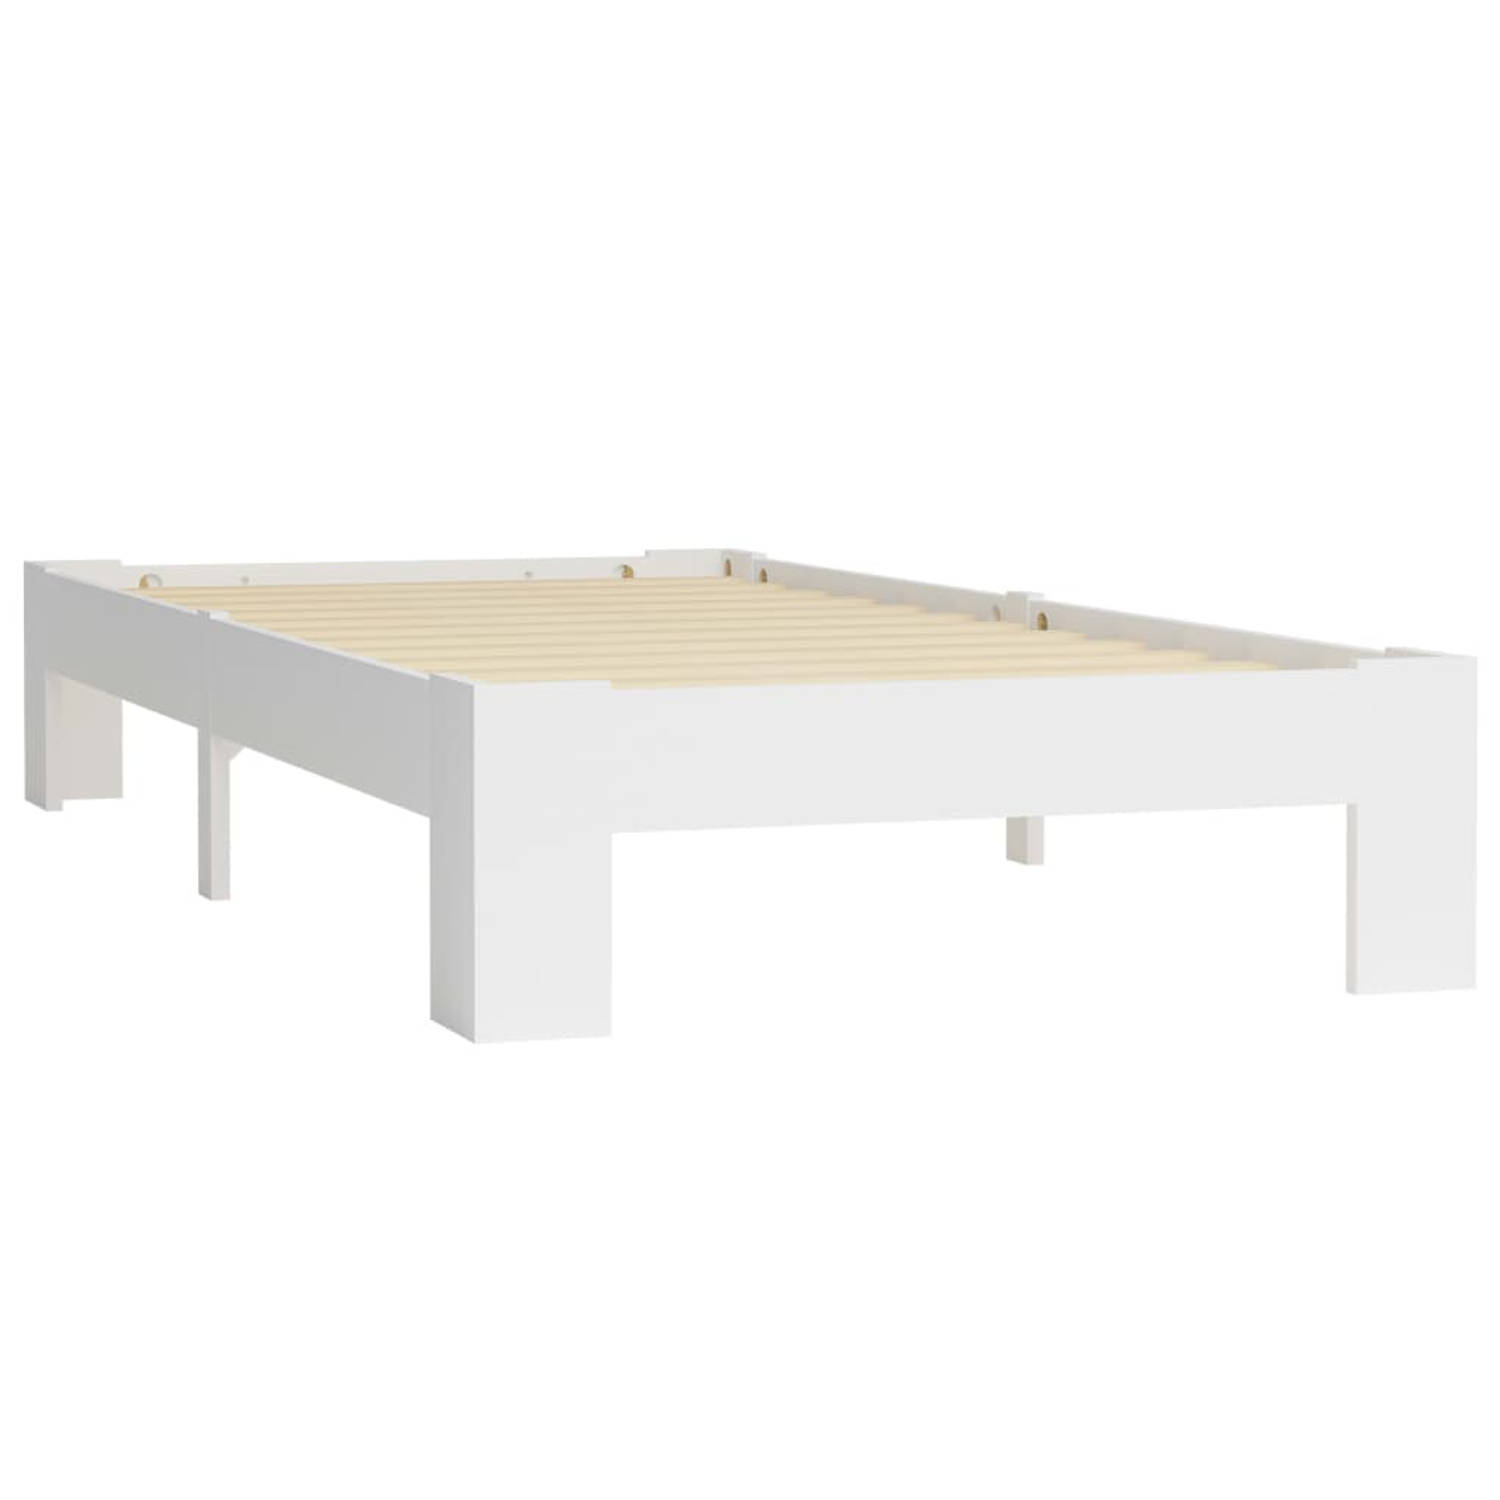 The Living Store Bedframe massief grenenhout wit 90x200 cm - Bed